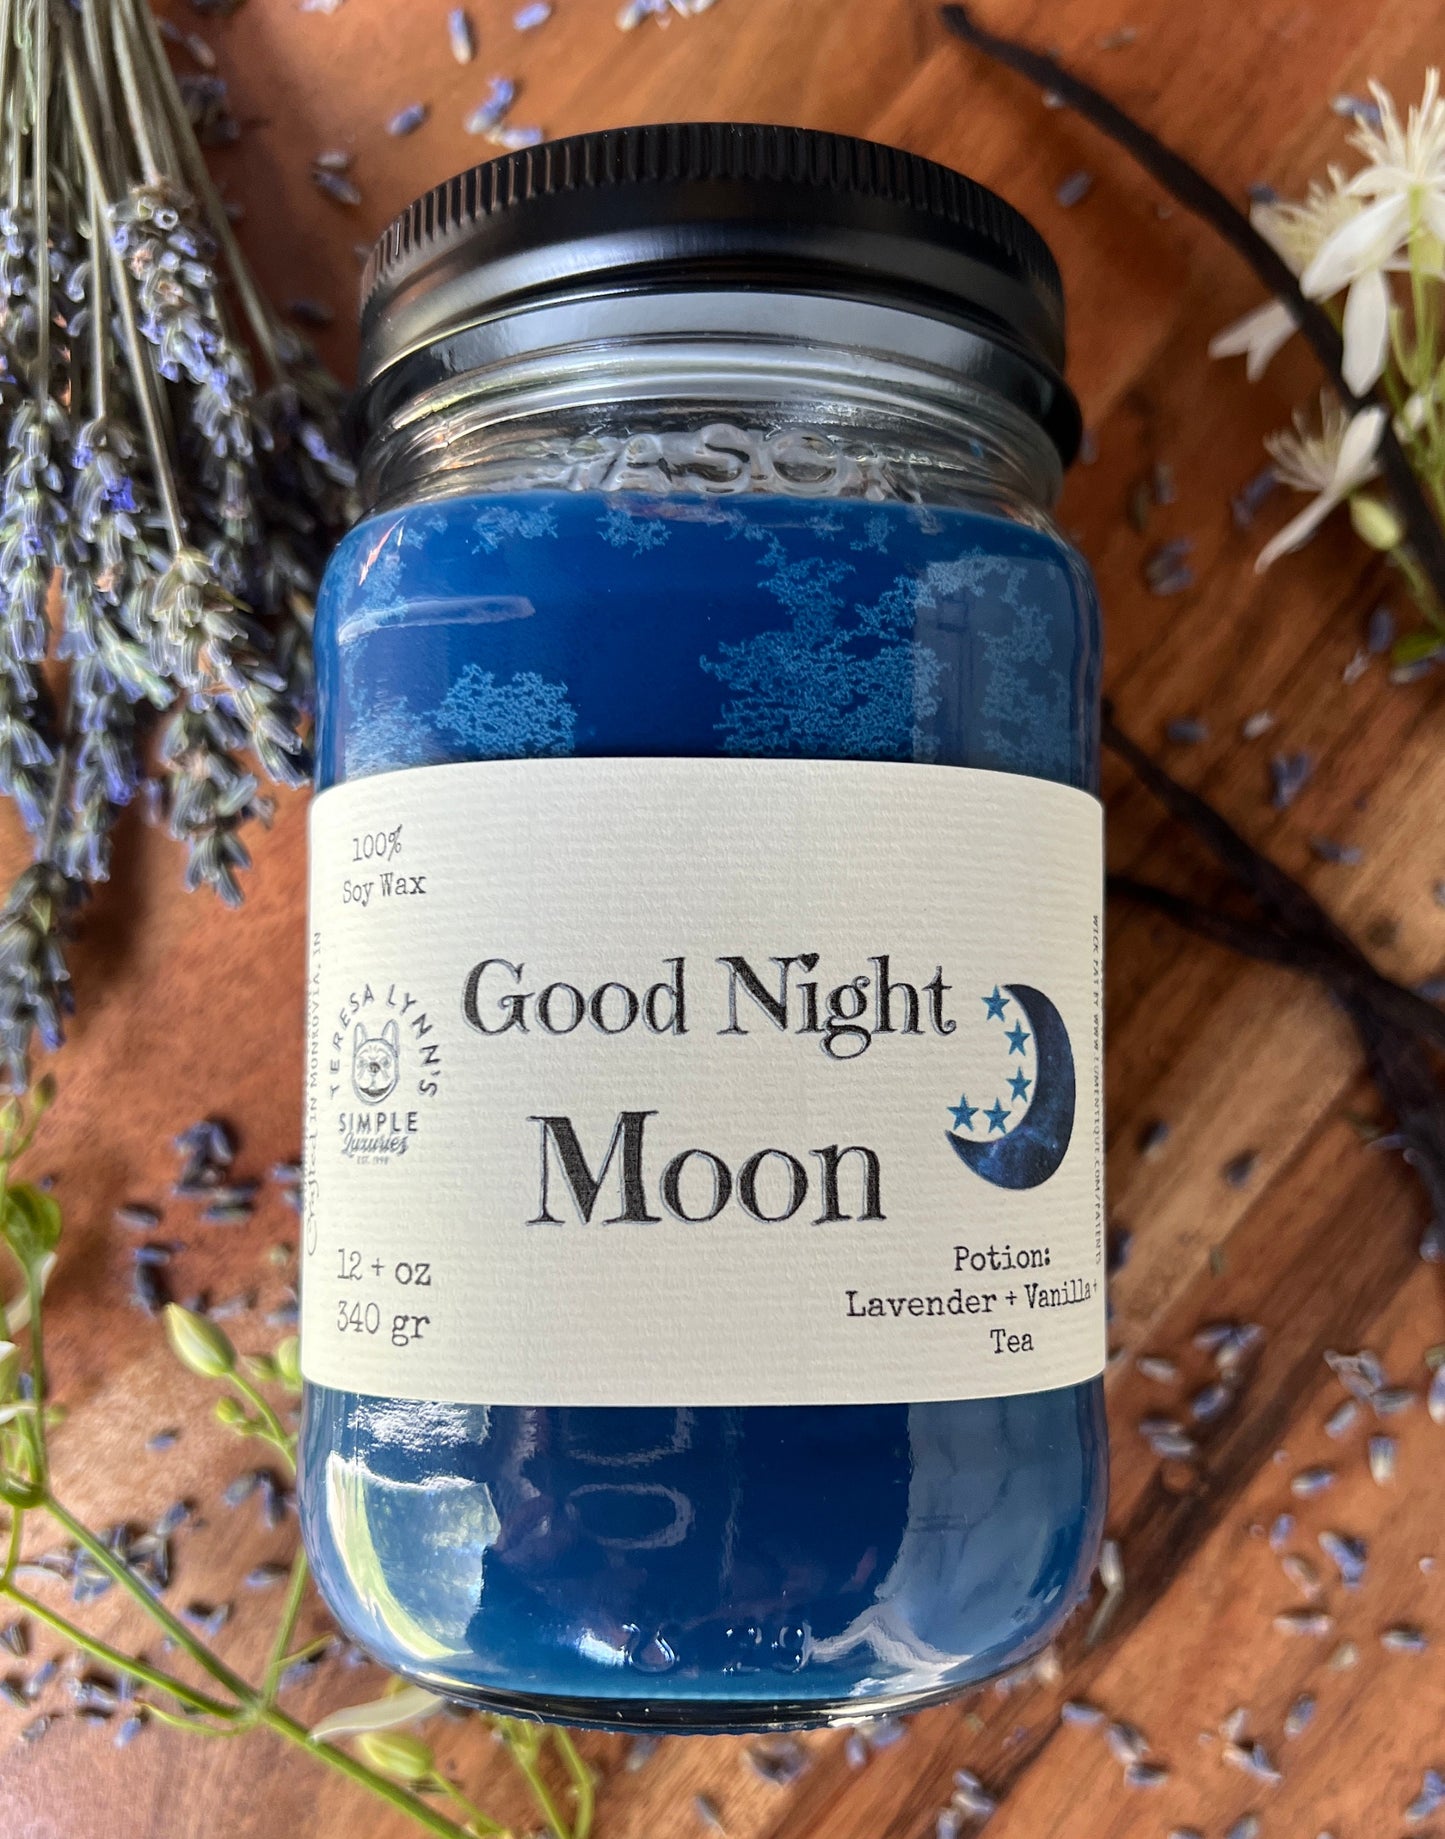 Good Night Moon, Wooden wick soy candle, anxiety care, relaxation candle, hand crafted, self care, crackling, Lavender, Tuberose, sleep